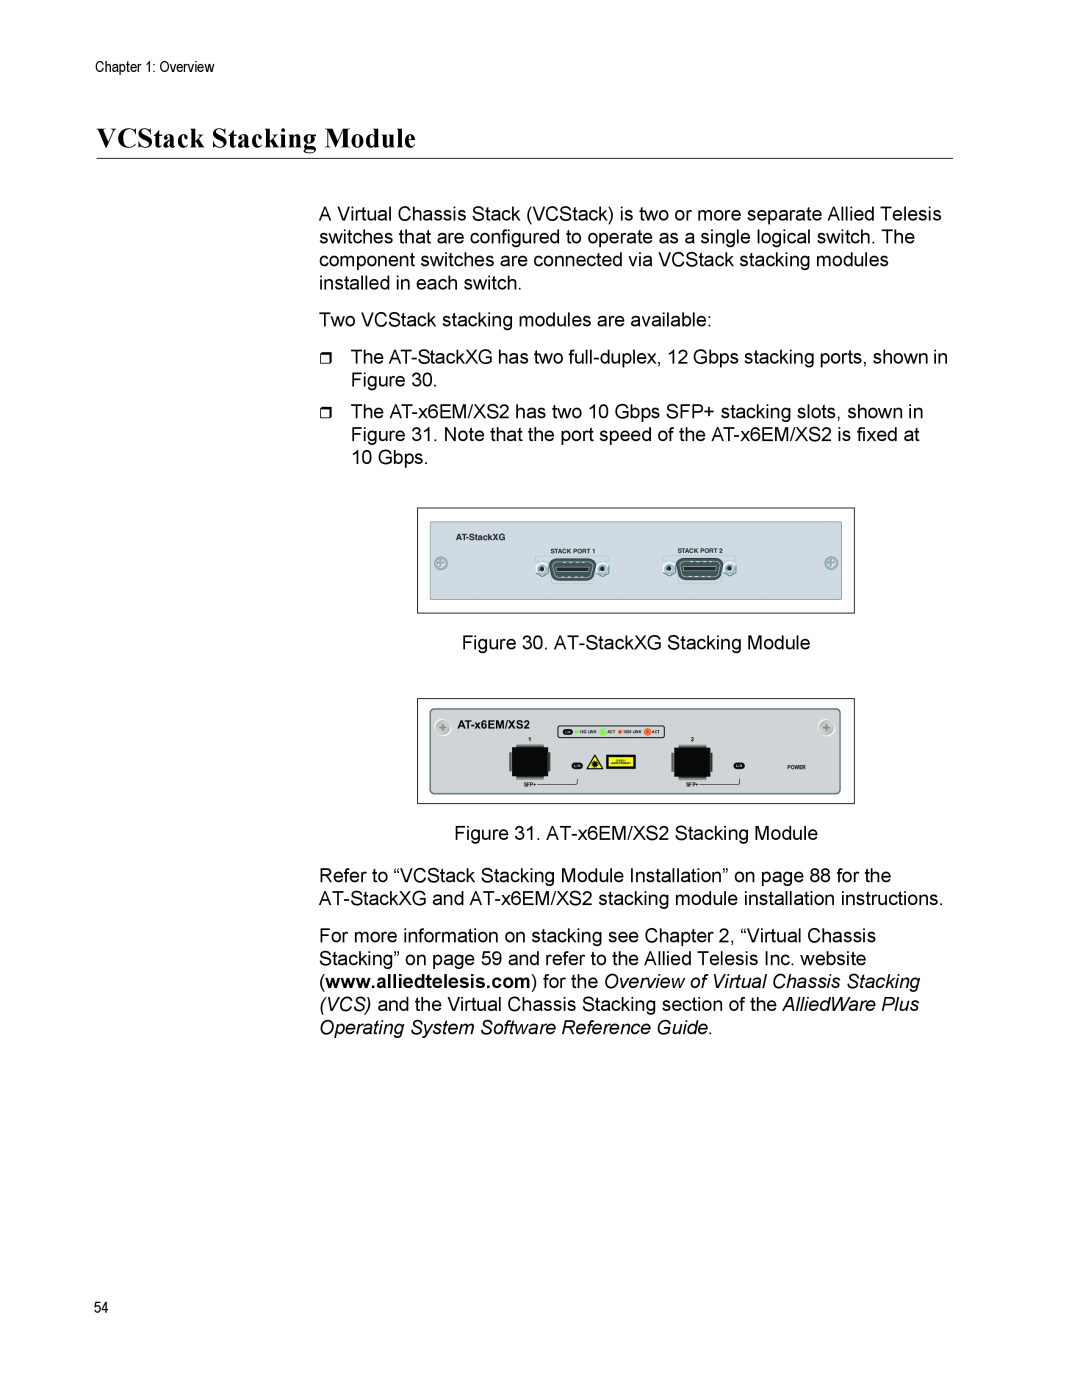 Allied Telesis X610-48TS-POE+, X610-48TS/X, X610-24TS-POE+, X610-24SPS/X, X610-24TS/X-POE+ manual VCStack Stacking Module 